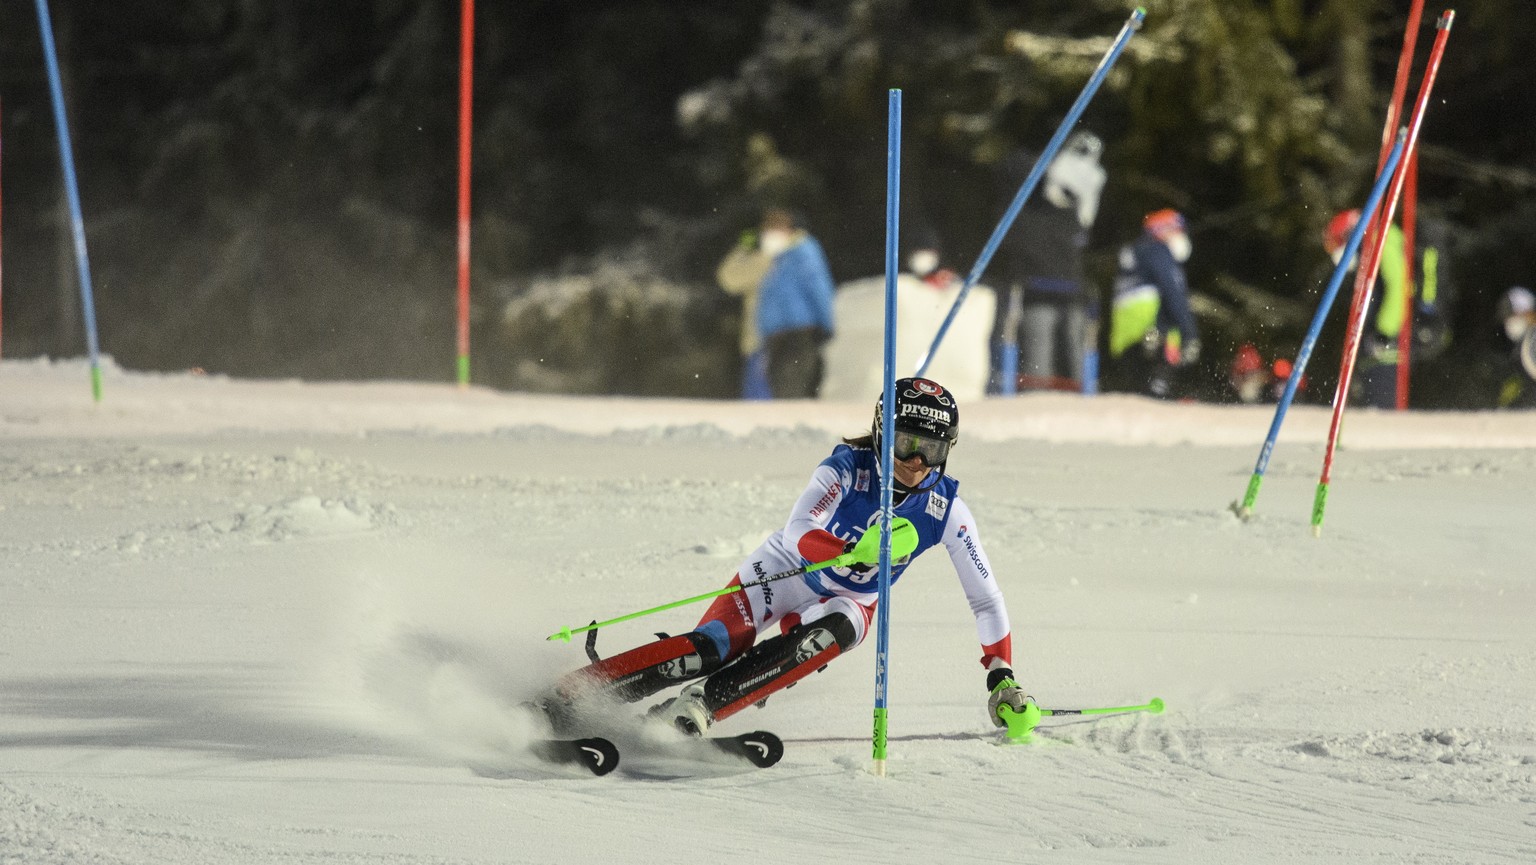 epa08909640 Camille Rast of Switzerland in action during the first run of the Women?s Slalom race at the FIS Alpine Skiing World Cup in Semmering, Austria, 29 December 2020. EPA/CHRISTIAN BRUNA